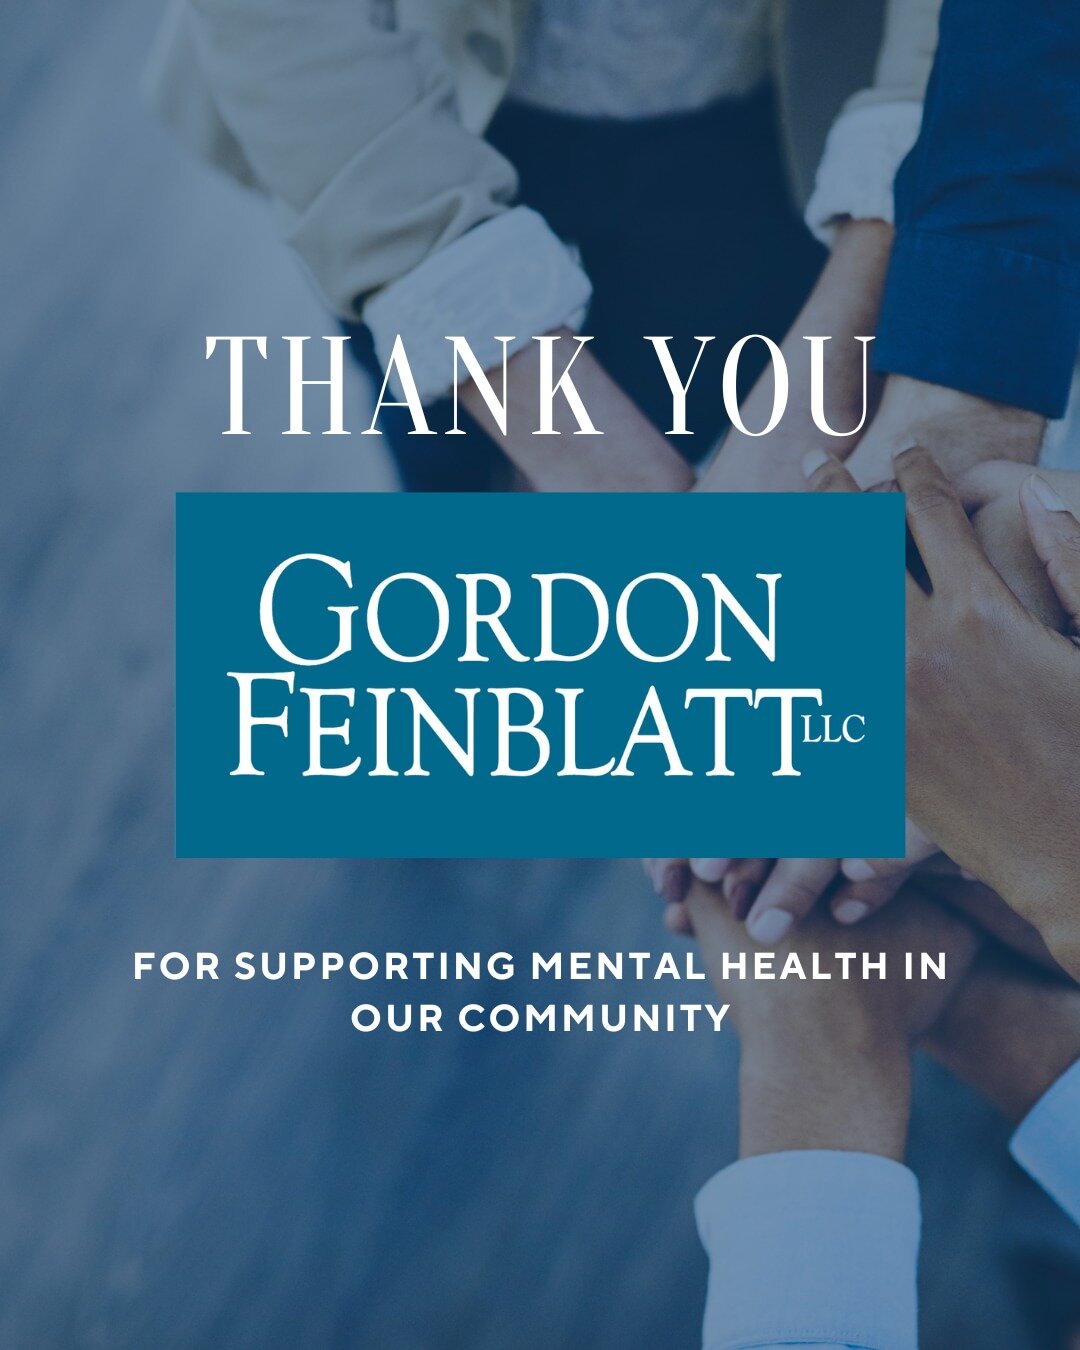 Thank you to this incredible sponsor, Gordon Feinblatt LLC, for their generous contribution to our Spring Awakening Celebration fundraiser! We are so grateful for their support in helping us achieve our fundraising goals. With their help, we can make